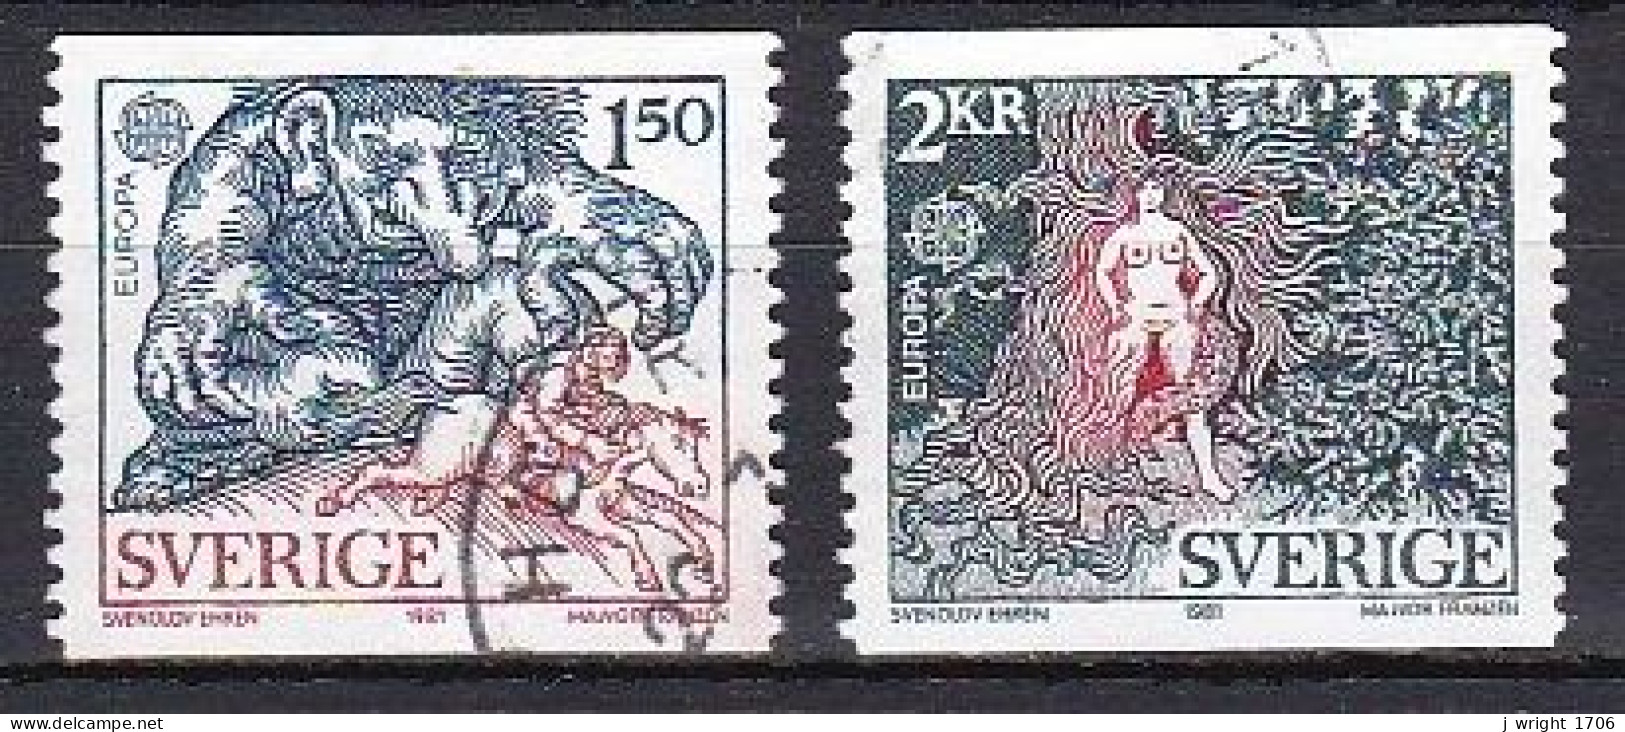 Sweden, 1981, Europa CEPT, Set, USED - Used Stamps